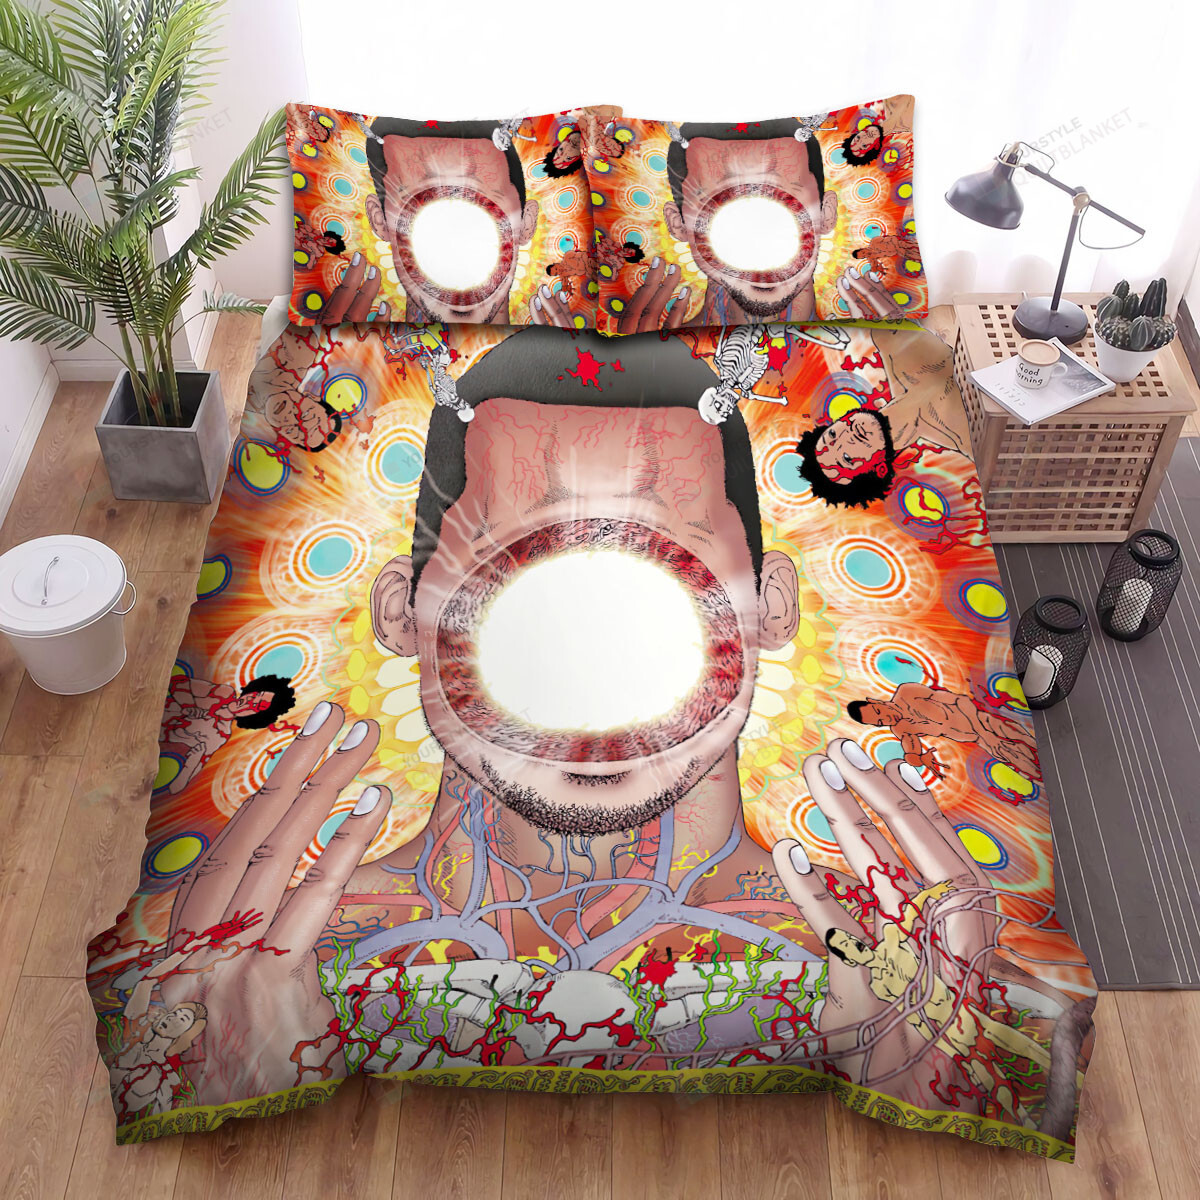 Miles Davis A Hole On Face Bed Sheets Spread Comforter Duvet Cover Bedding Sets